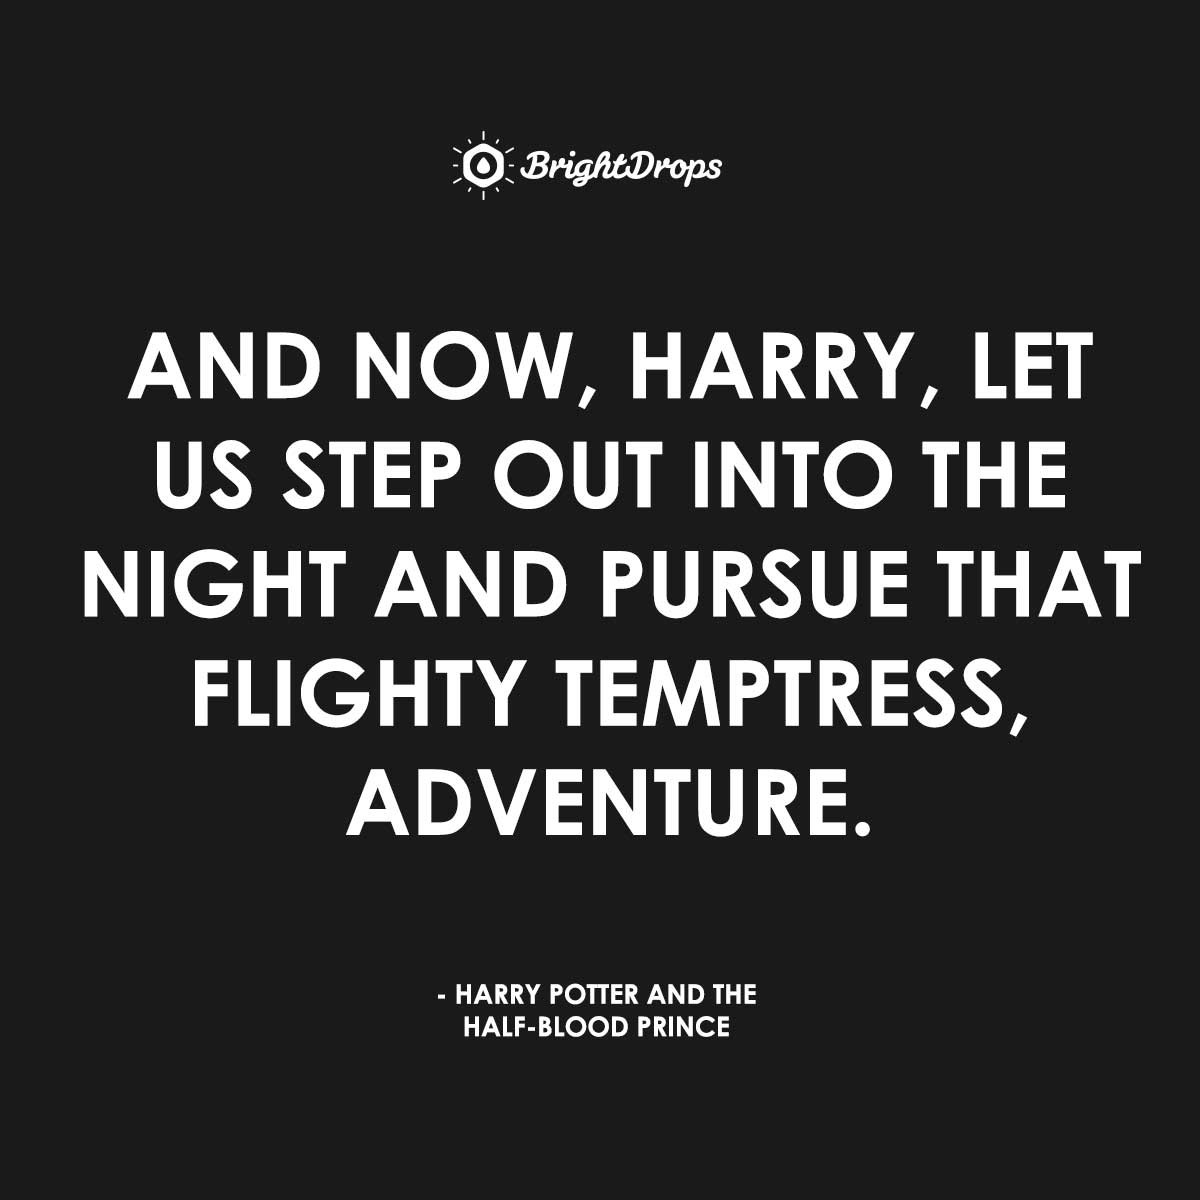 Harry Potter Quotes Inspirational
 36 Inspirational Harry Potter Quotes for a Braver You